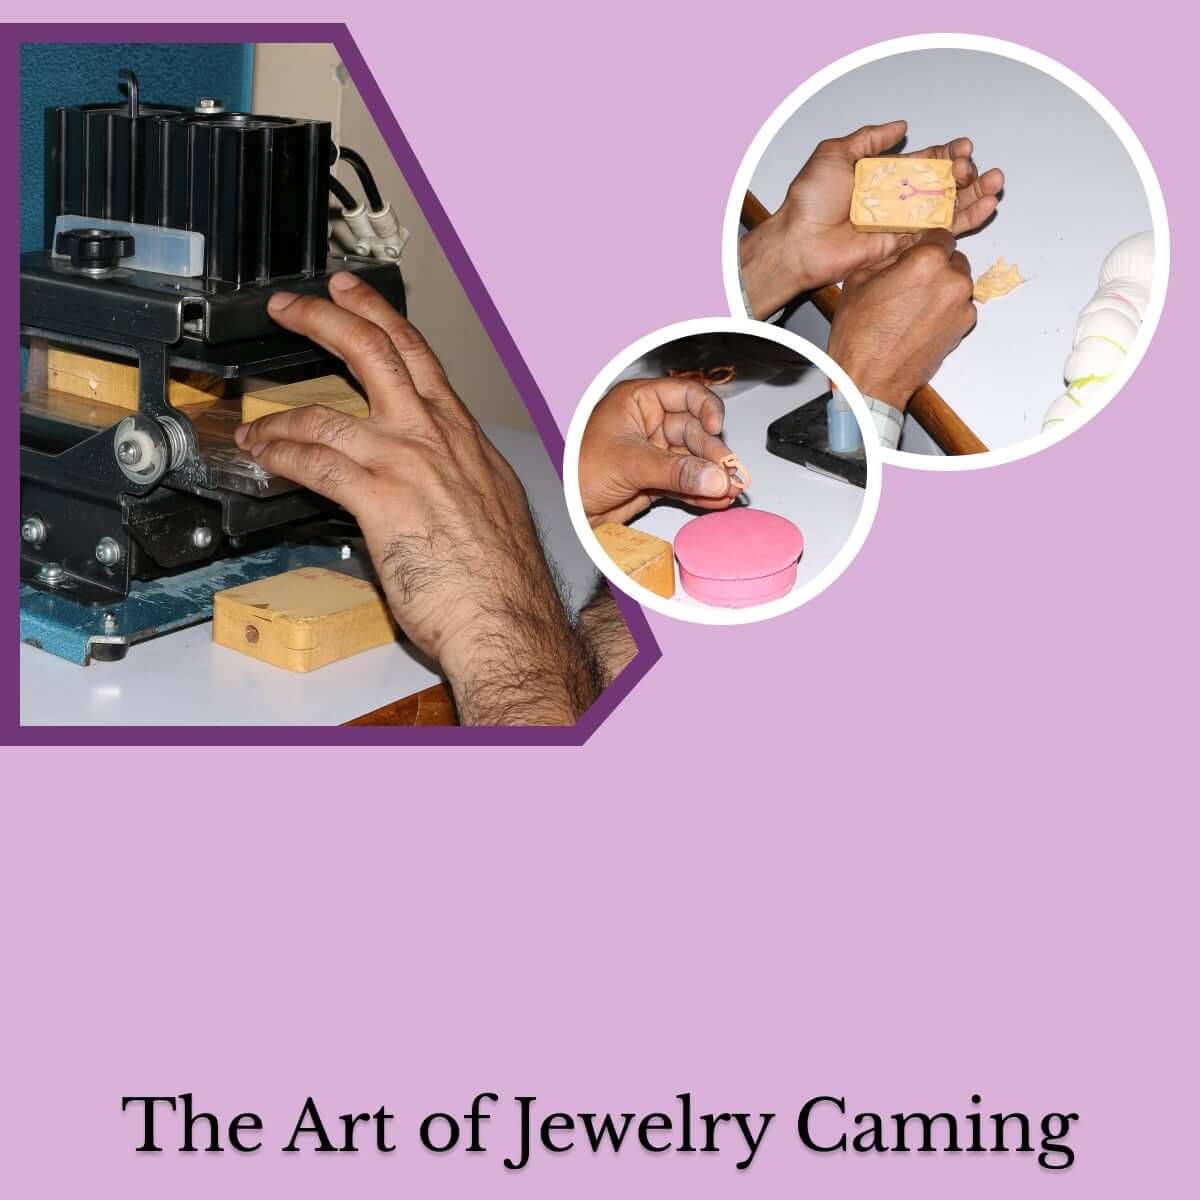 Caming Process Of Jewelry